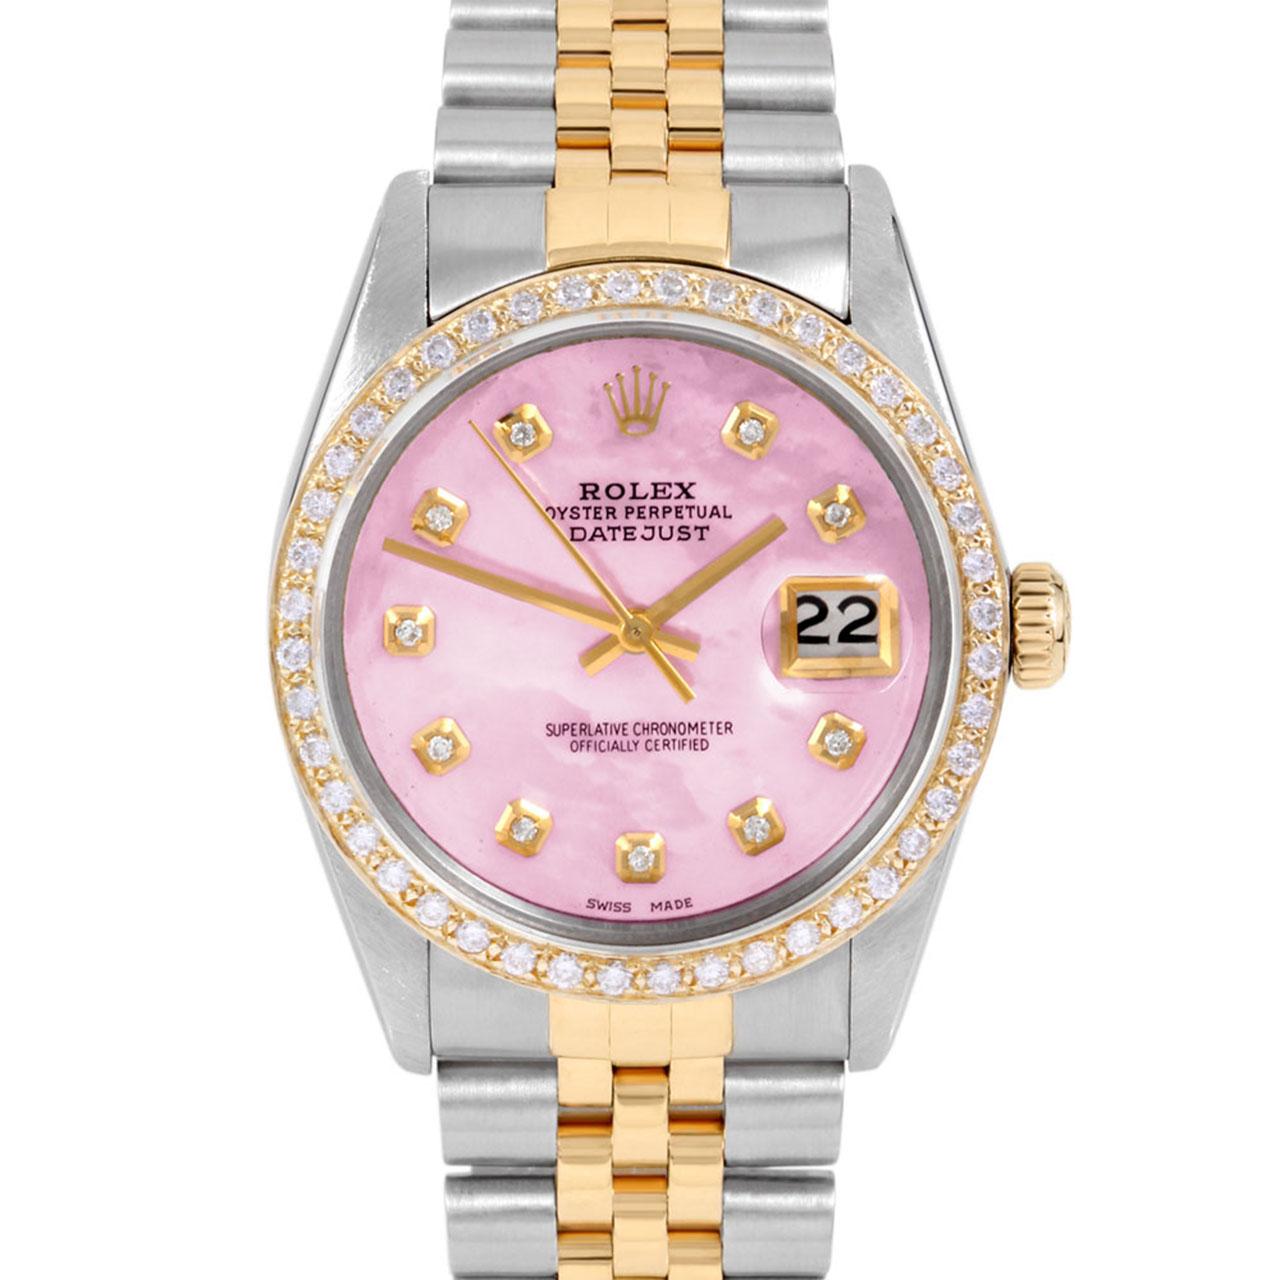 Swiss Wrist - SKU 16013-PMOP-DIA-AM-BDS-JBL

Brand : Rolex
Model : Datejust Ref# 16013 - Plastic Quickset Model 
Gender : Mens
Metals : 14K Yellow Gold/ Stainless Steel
Case Size : 36 mm
Dial : Custom Pink Mother Of Pearl Diamond Dial (This dial is